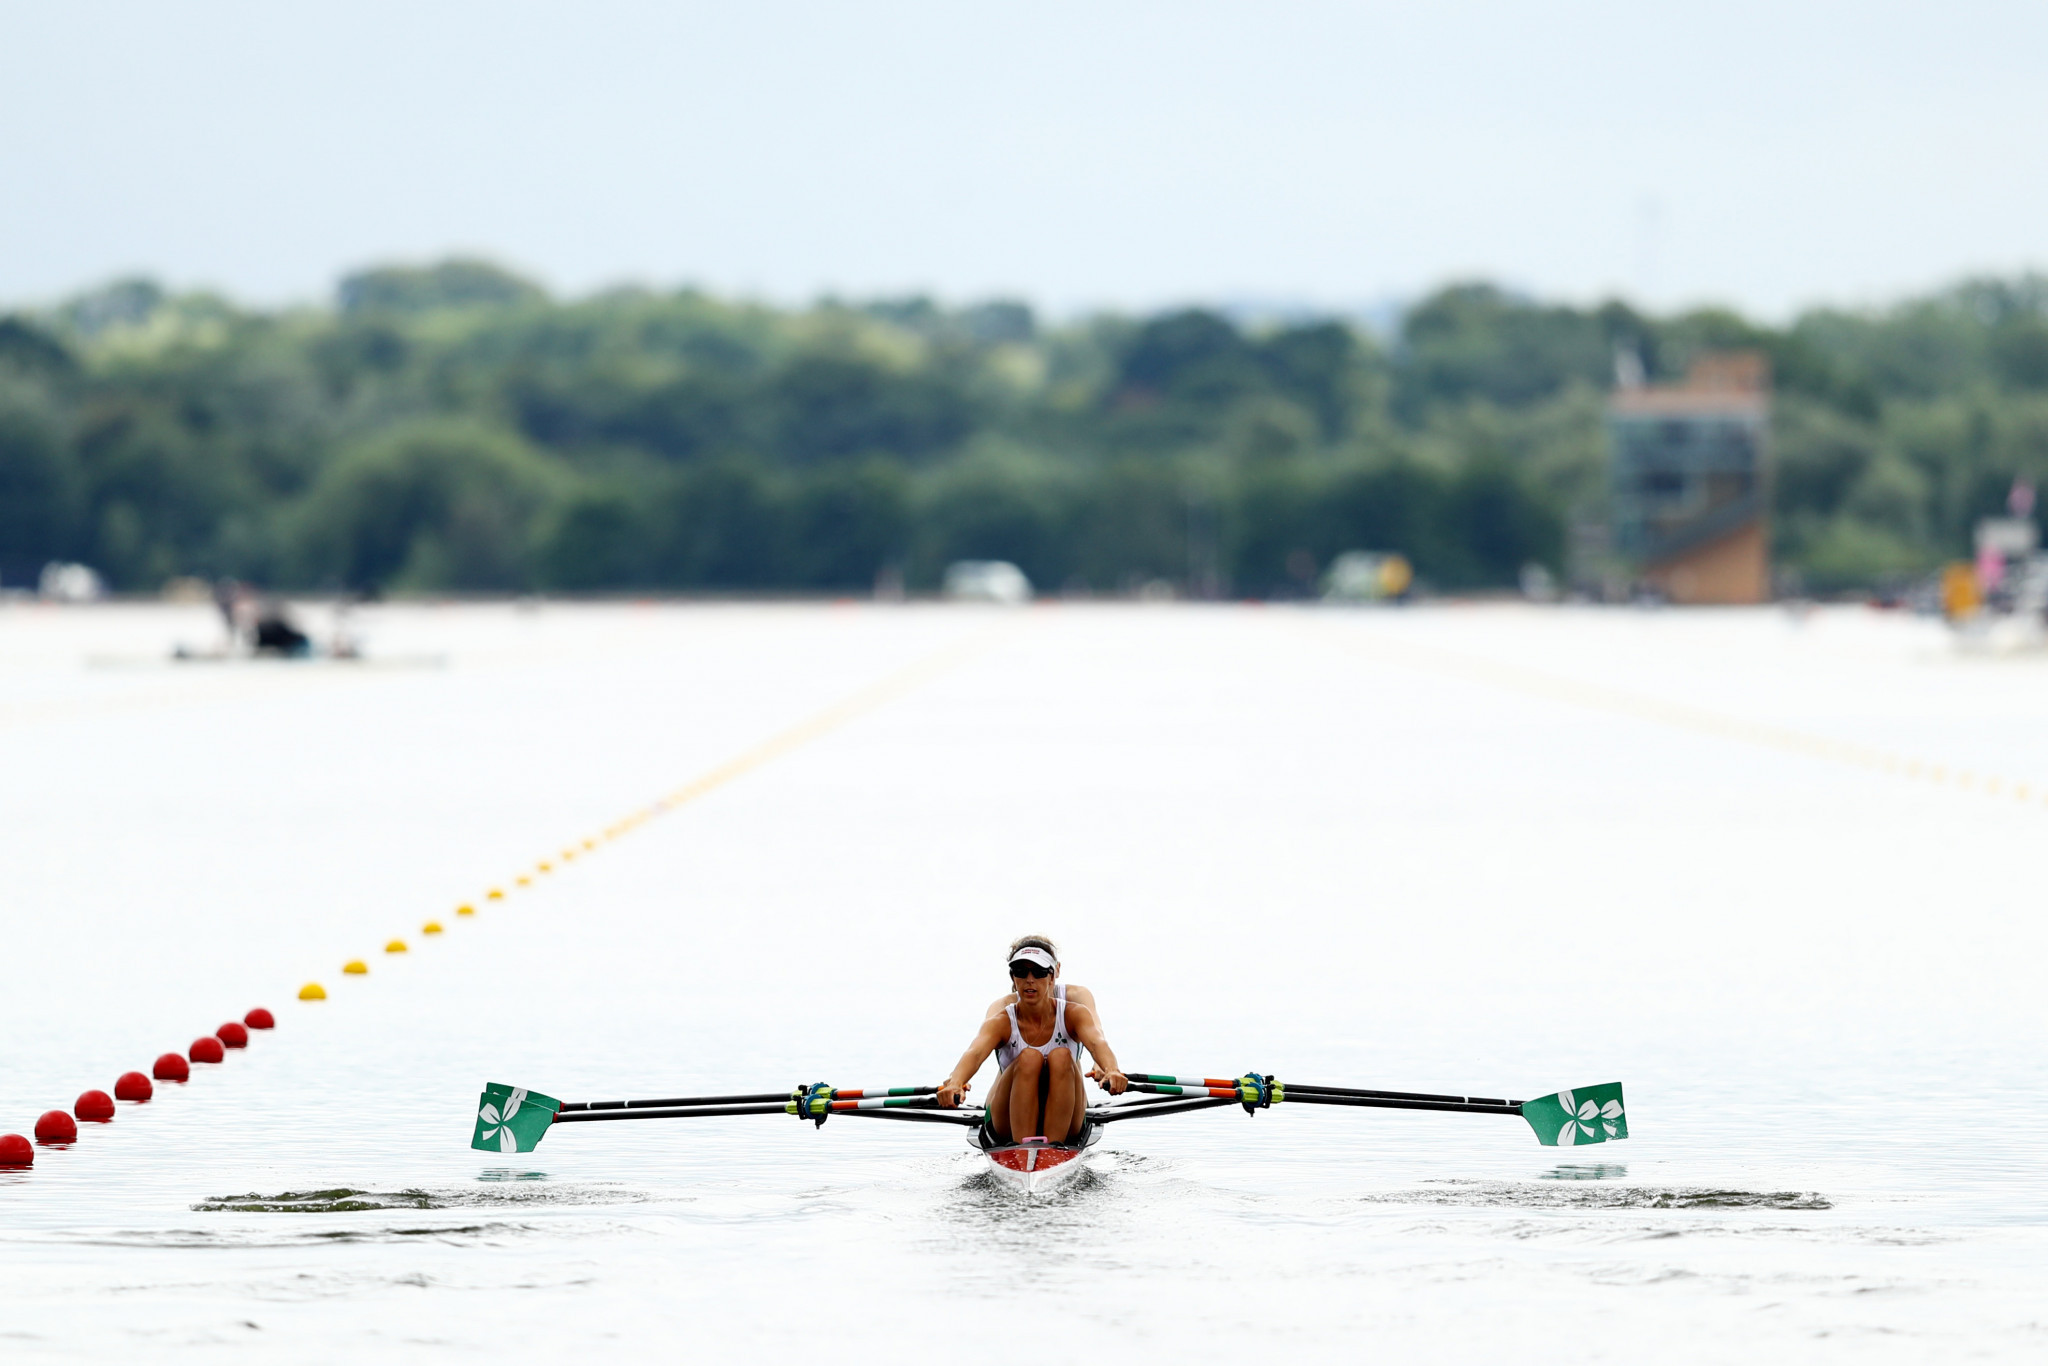 The Championships began with rowing action on day one ©Getty Images